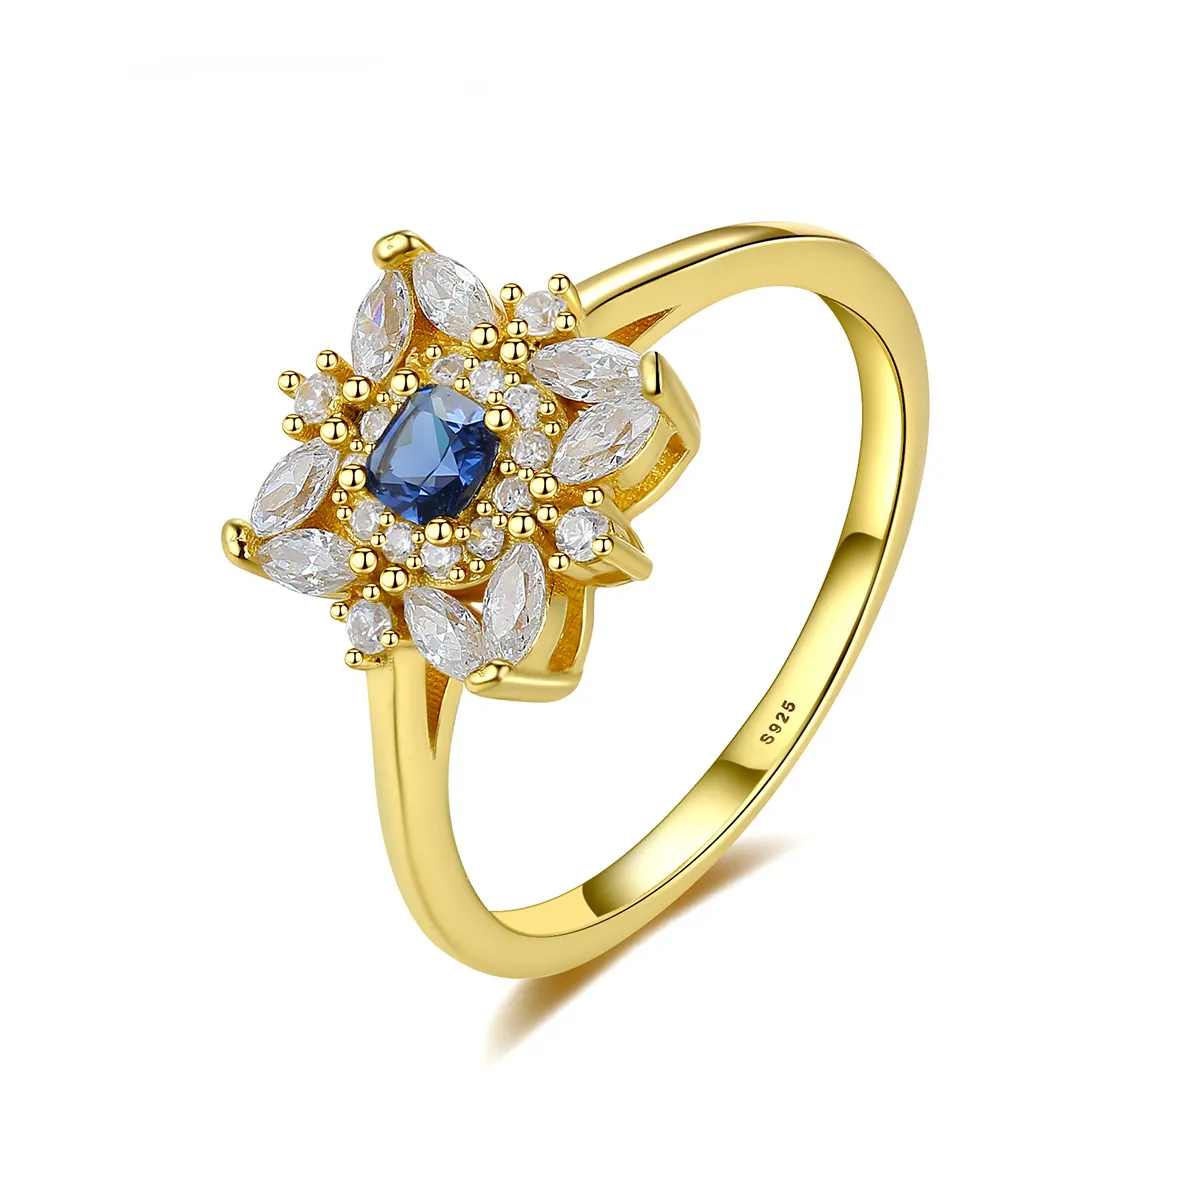 Luxury Palace Style 925 Silver Jewelry 18K Gold Plated Blue Zircon Blossom Jewelry Rings For Women